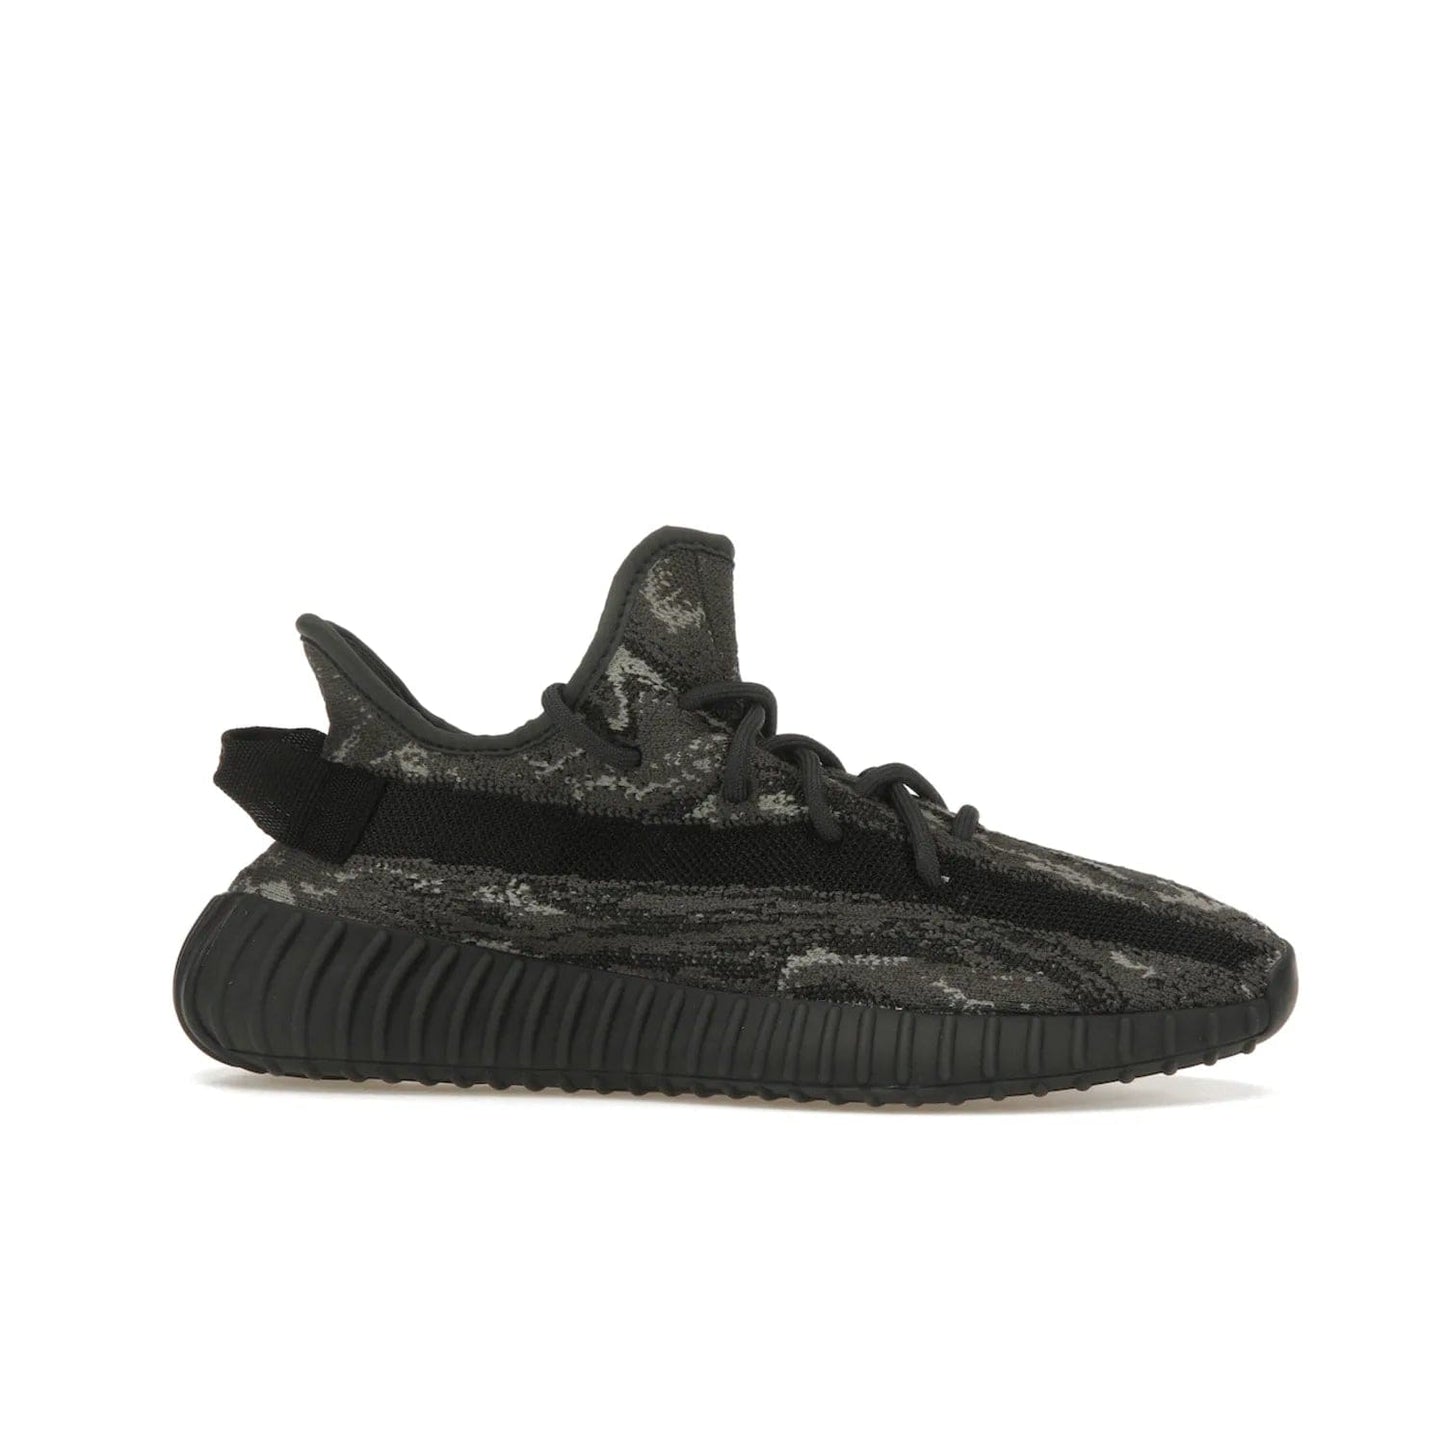 adidas Yeezy Boost 350 V2 MX Dark Salt - Image 2 - Only at www.BallersClubKickz.com - ##
The adidas Yeezy Boost 350 V2 MX Dark Salt offers a contemporary look with a signature combination of grey and black hues. Cushioned Boost midsole and side stripe allow for all day wear. Get the perfect fashion-forward addition with this sleek sneaker for $230.